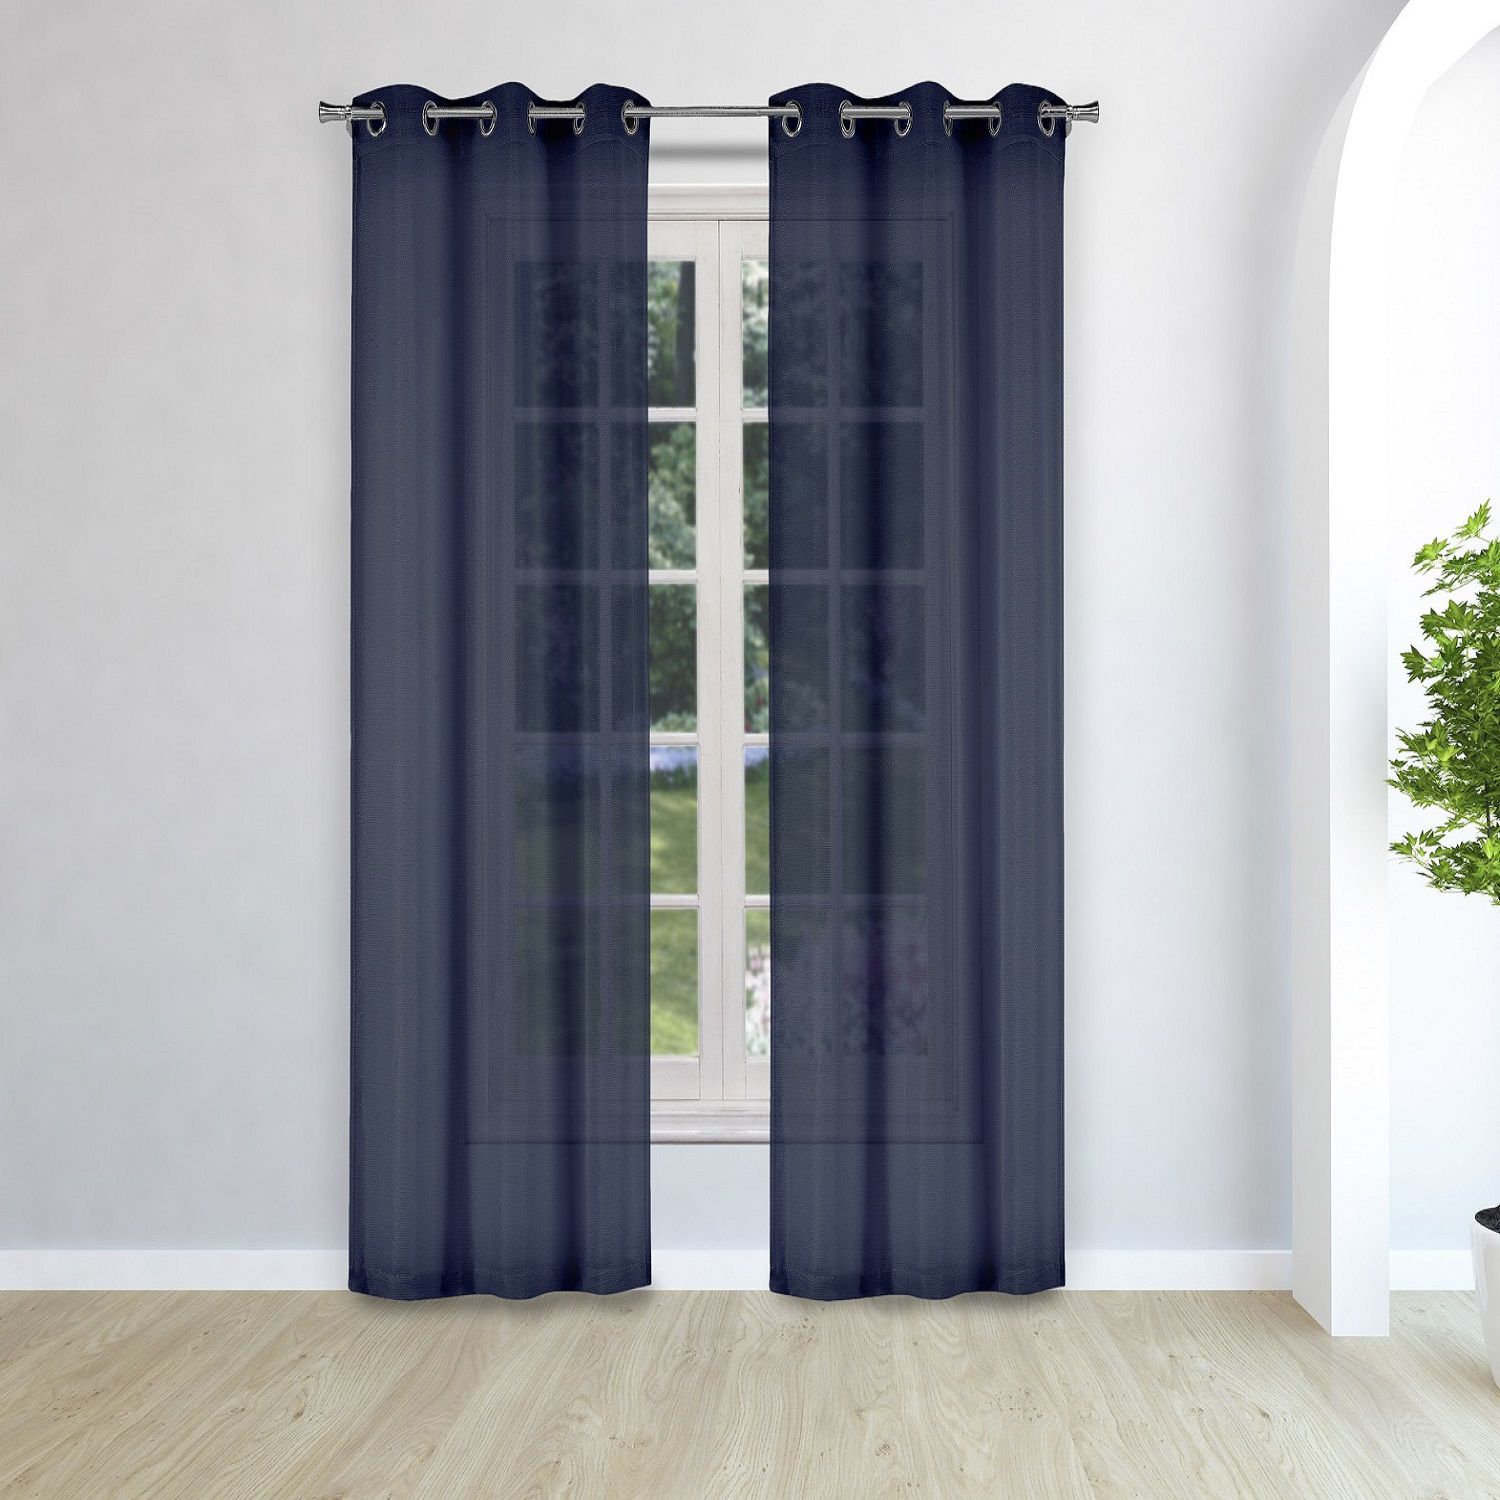 Image for Duck River Textile Justus Thin 2-pack Window Curtain Set at Kohl's.